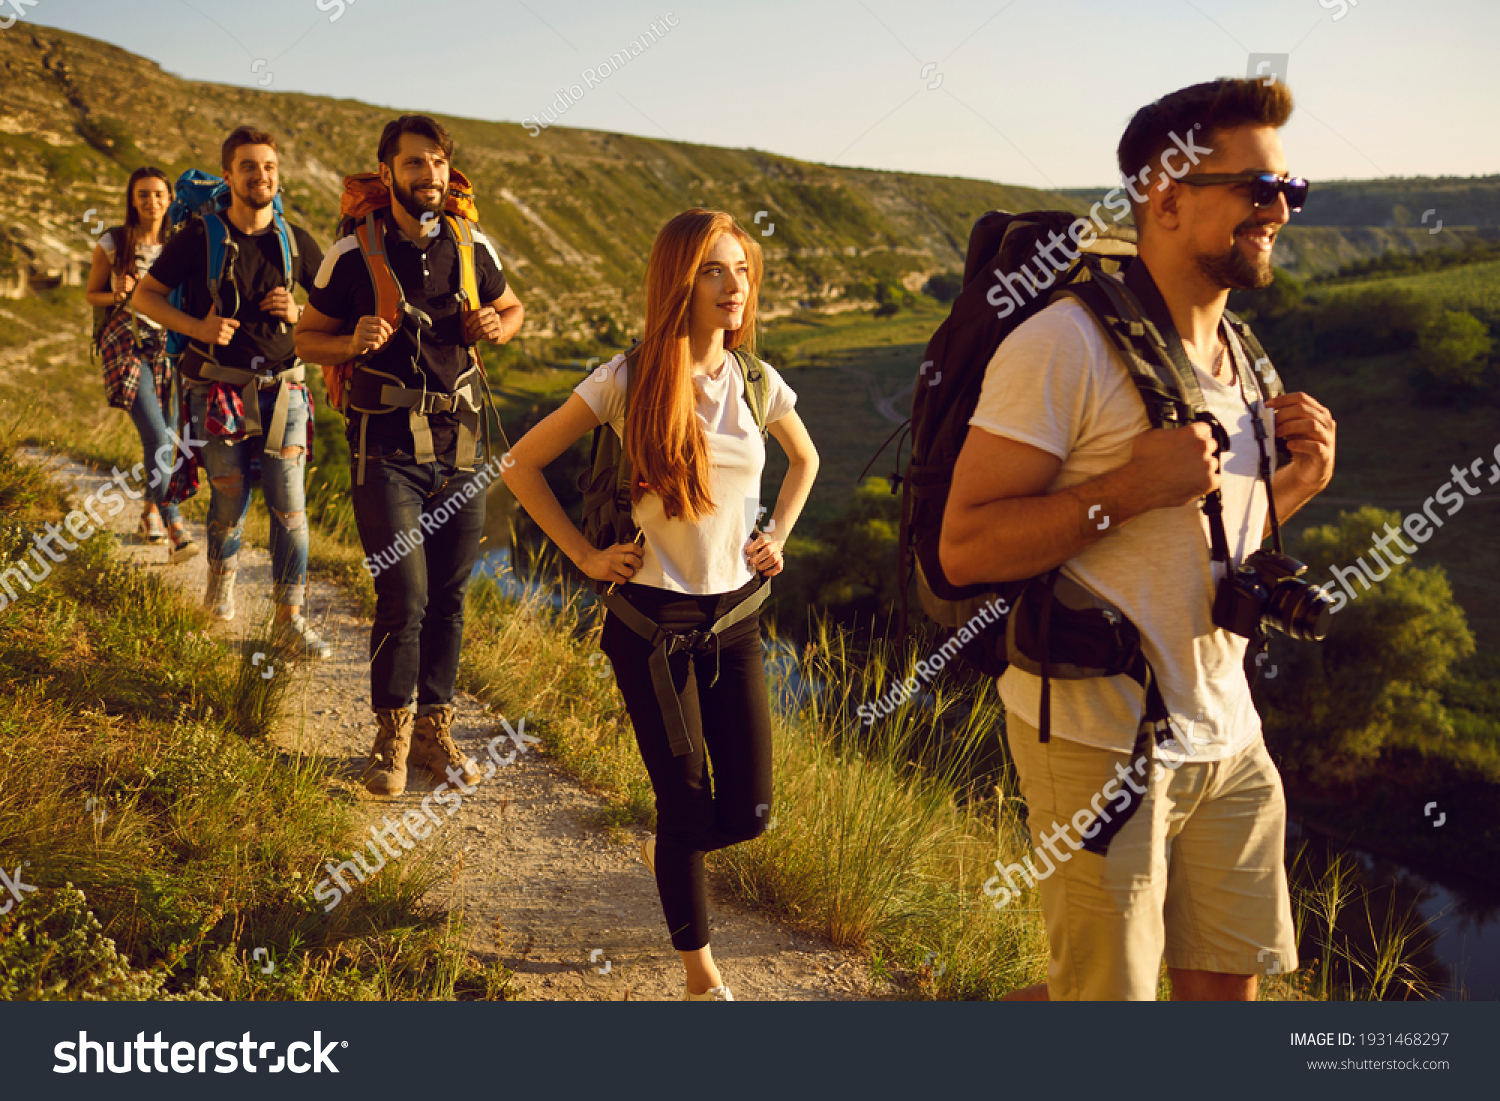 Group of men and women walk in a row along the trail during a walking tour of the mountains. Adventure, travel, tourism, hike and people concept. Camping season. #1931468297